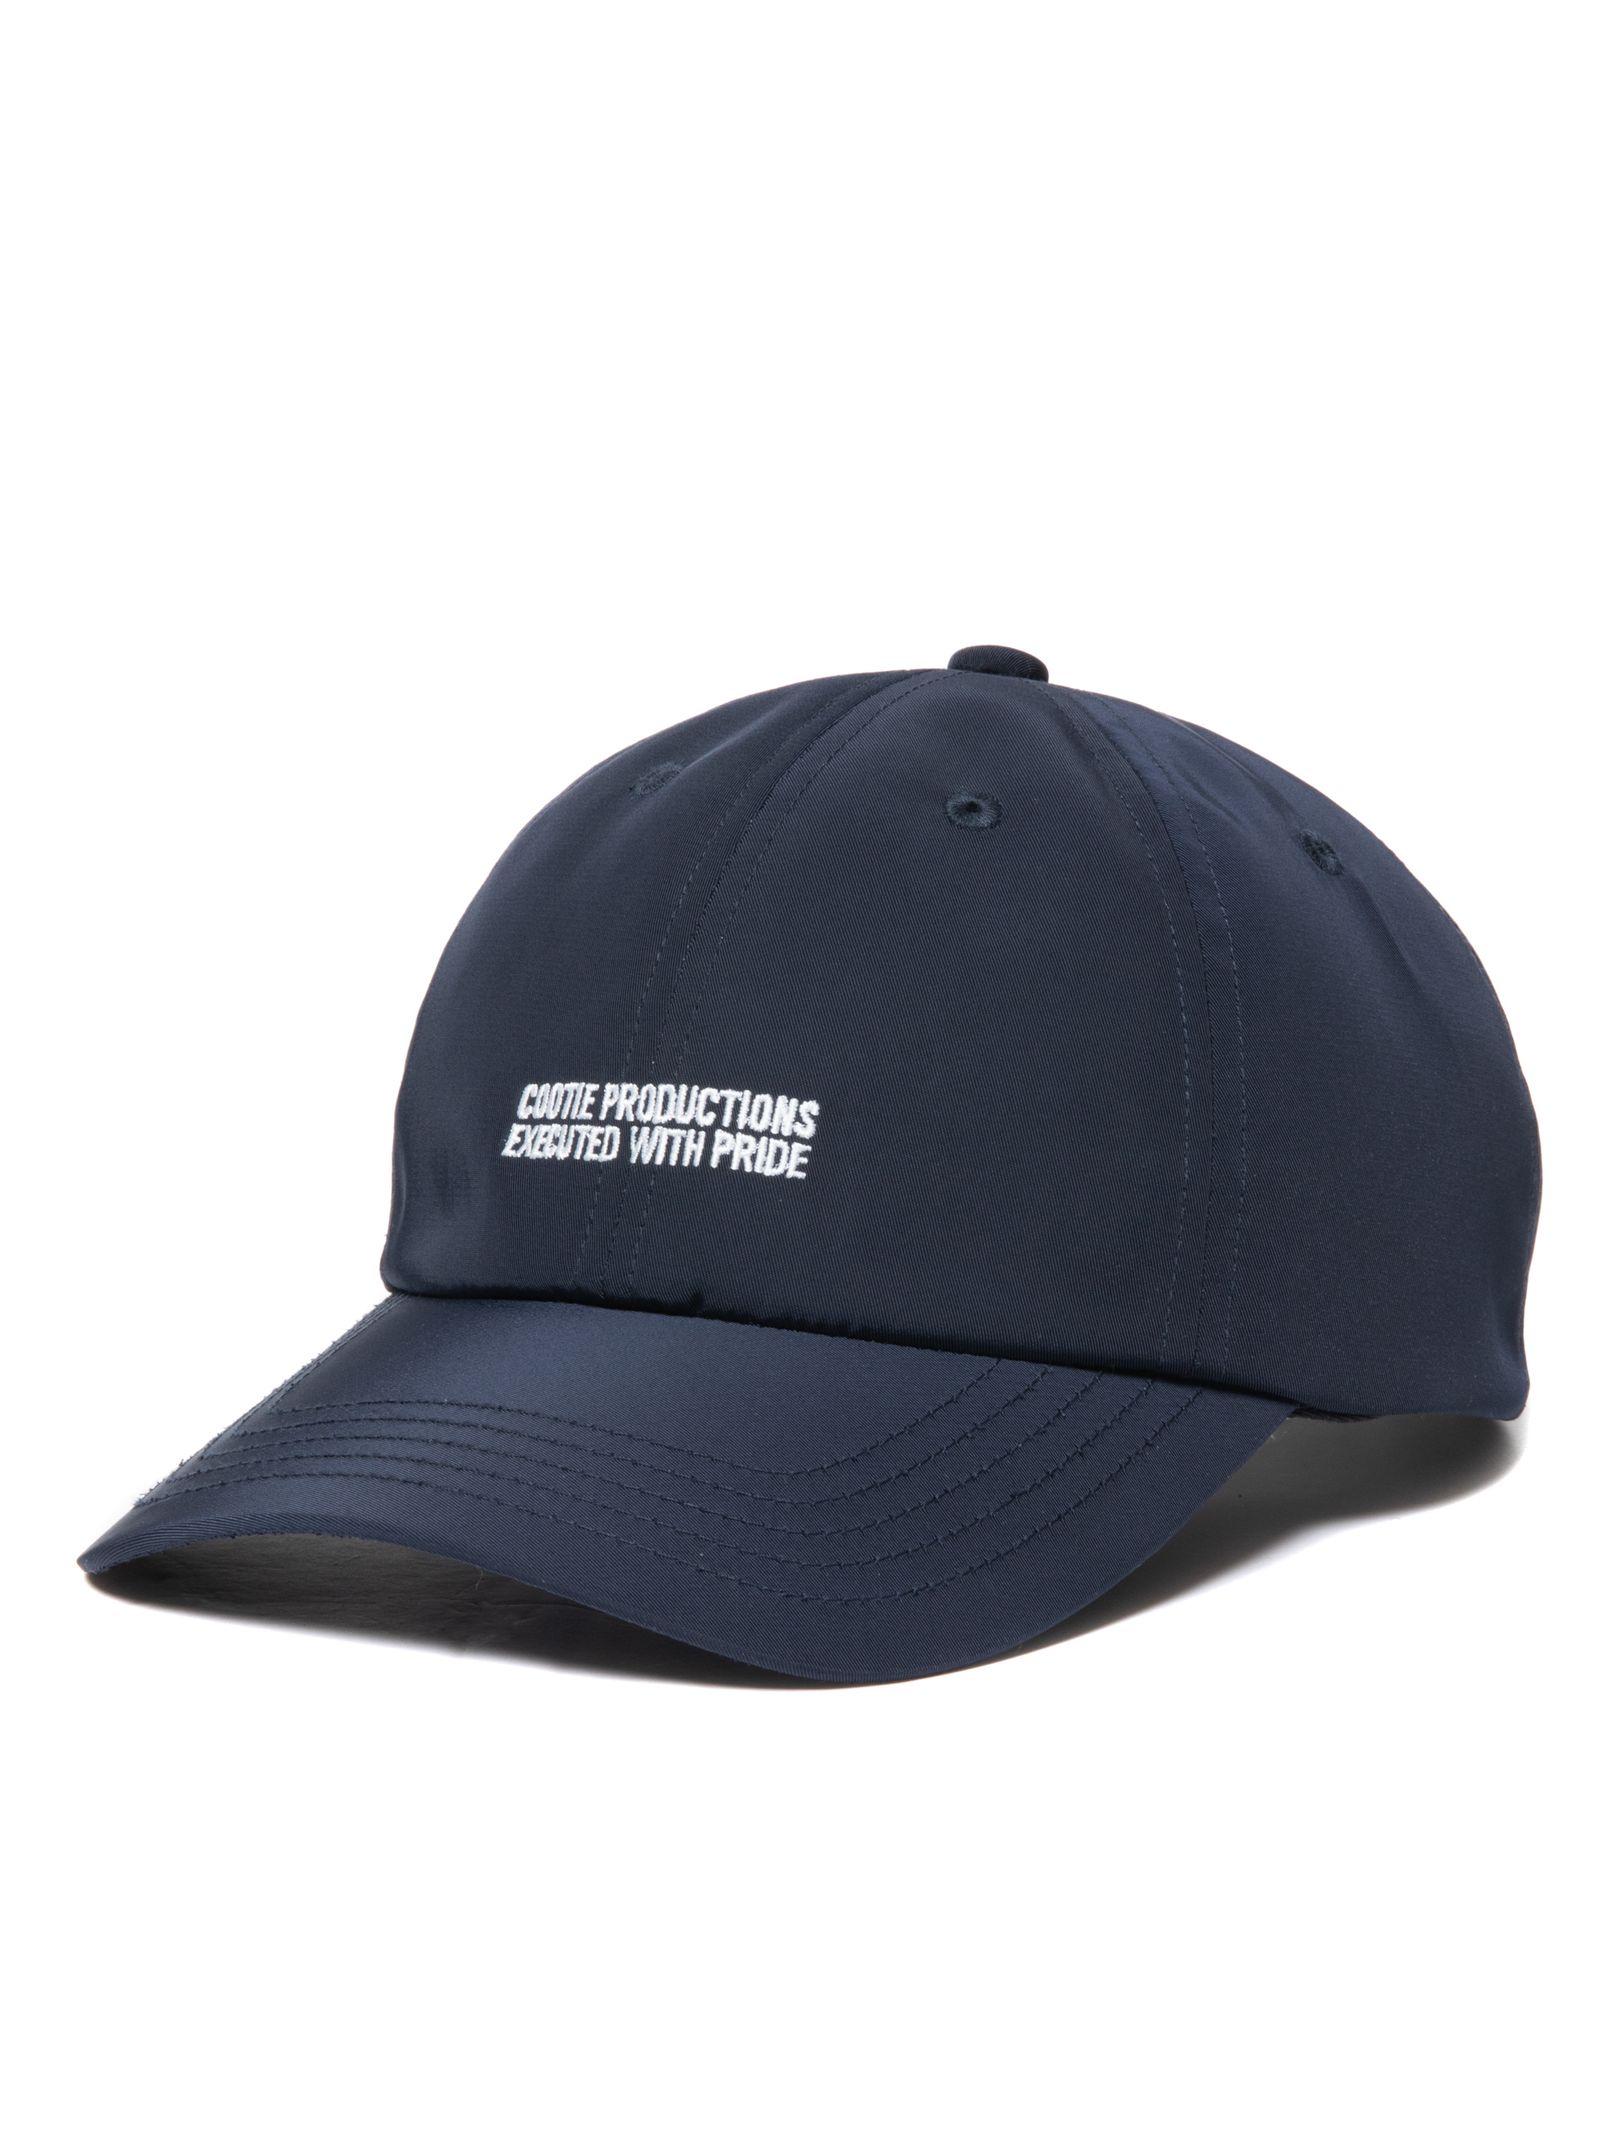 COOTIE PRODUCTIONS - POLYESTER 6 PANEL CAP (BLACK) / ポリエステル